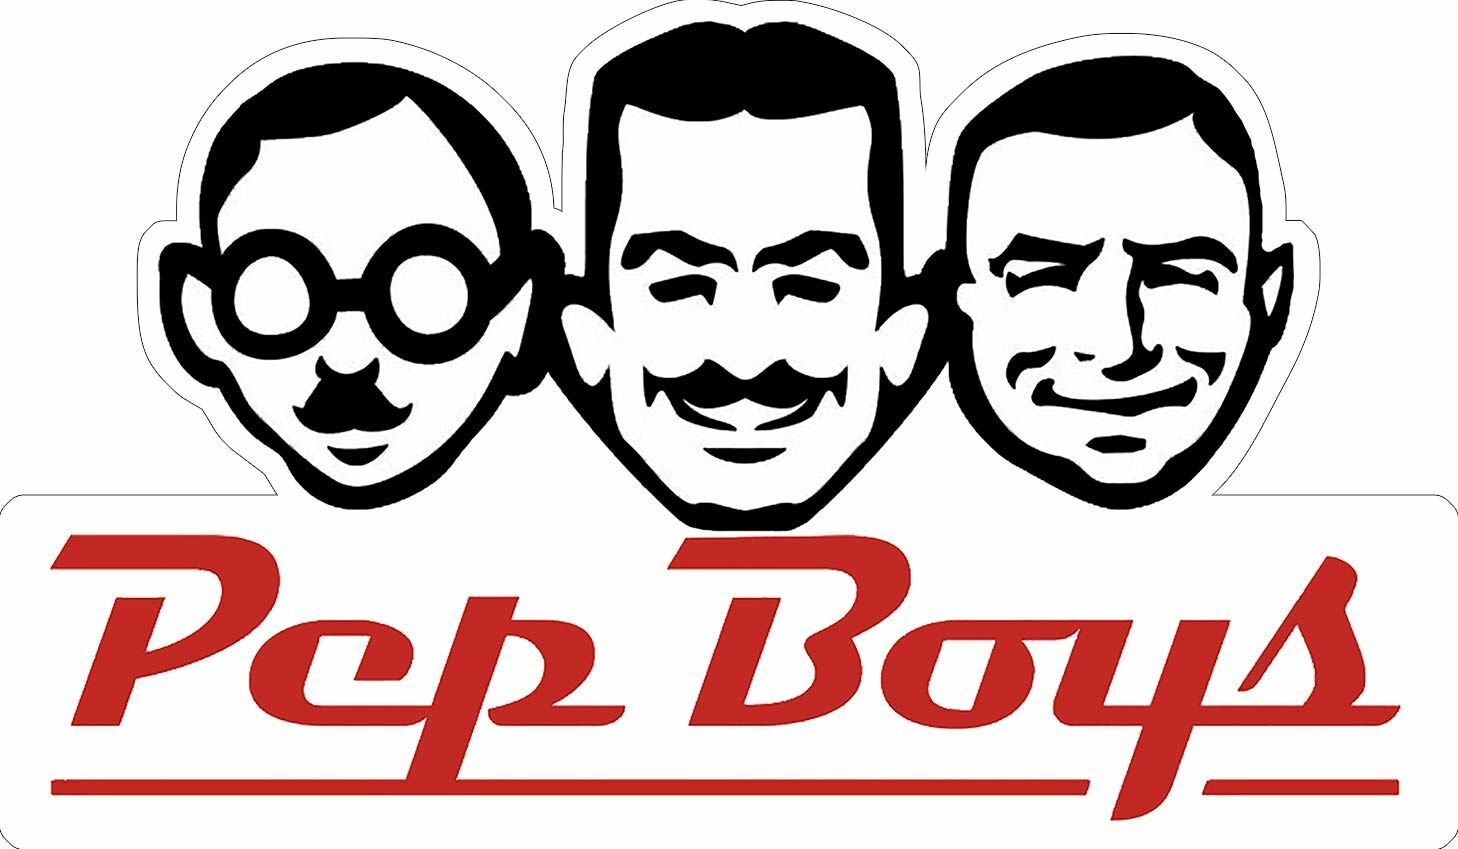 Pep Boys Manny Moe and Jack Heads Laser Cut Metal Sign